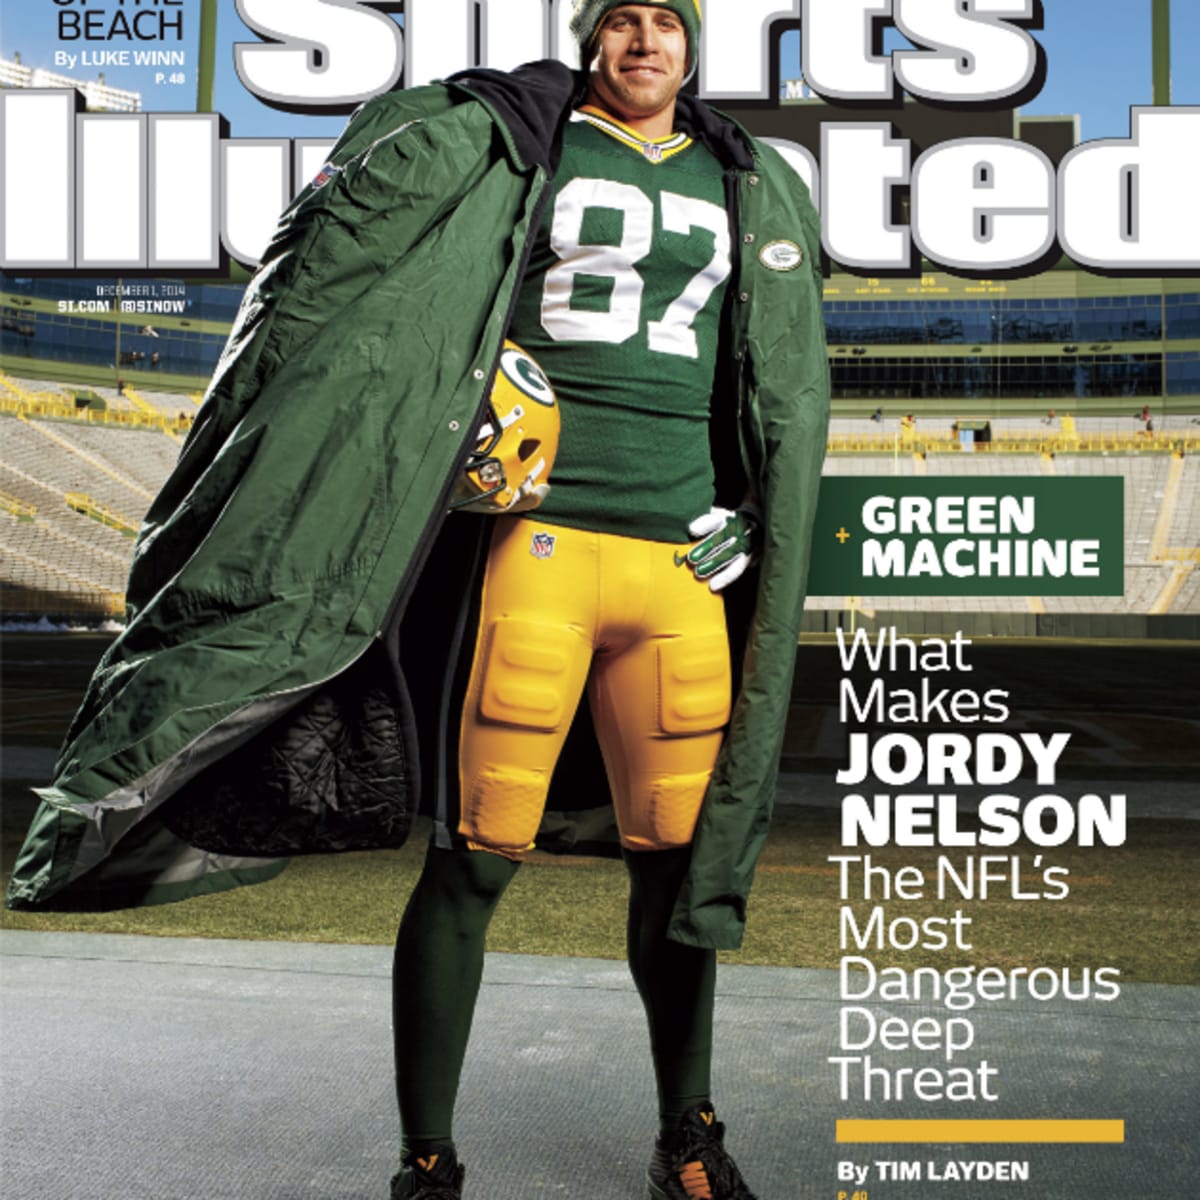 Green Bay Packers receiver Jordy Nelson featured on Sports Illustrated cover  - Sports Illustrated